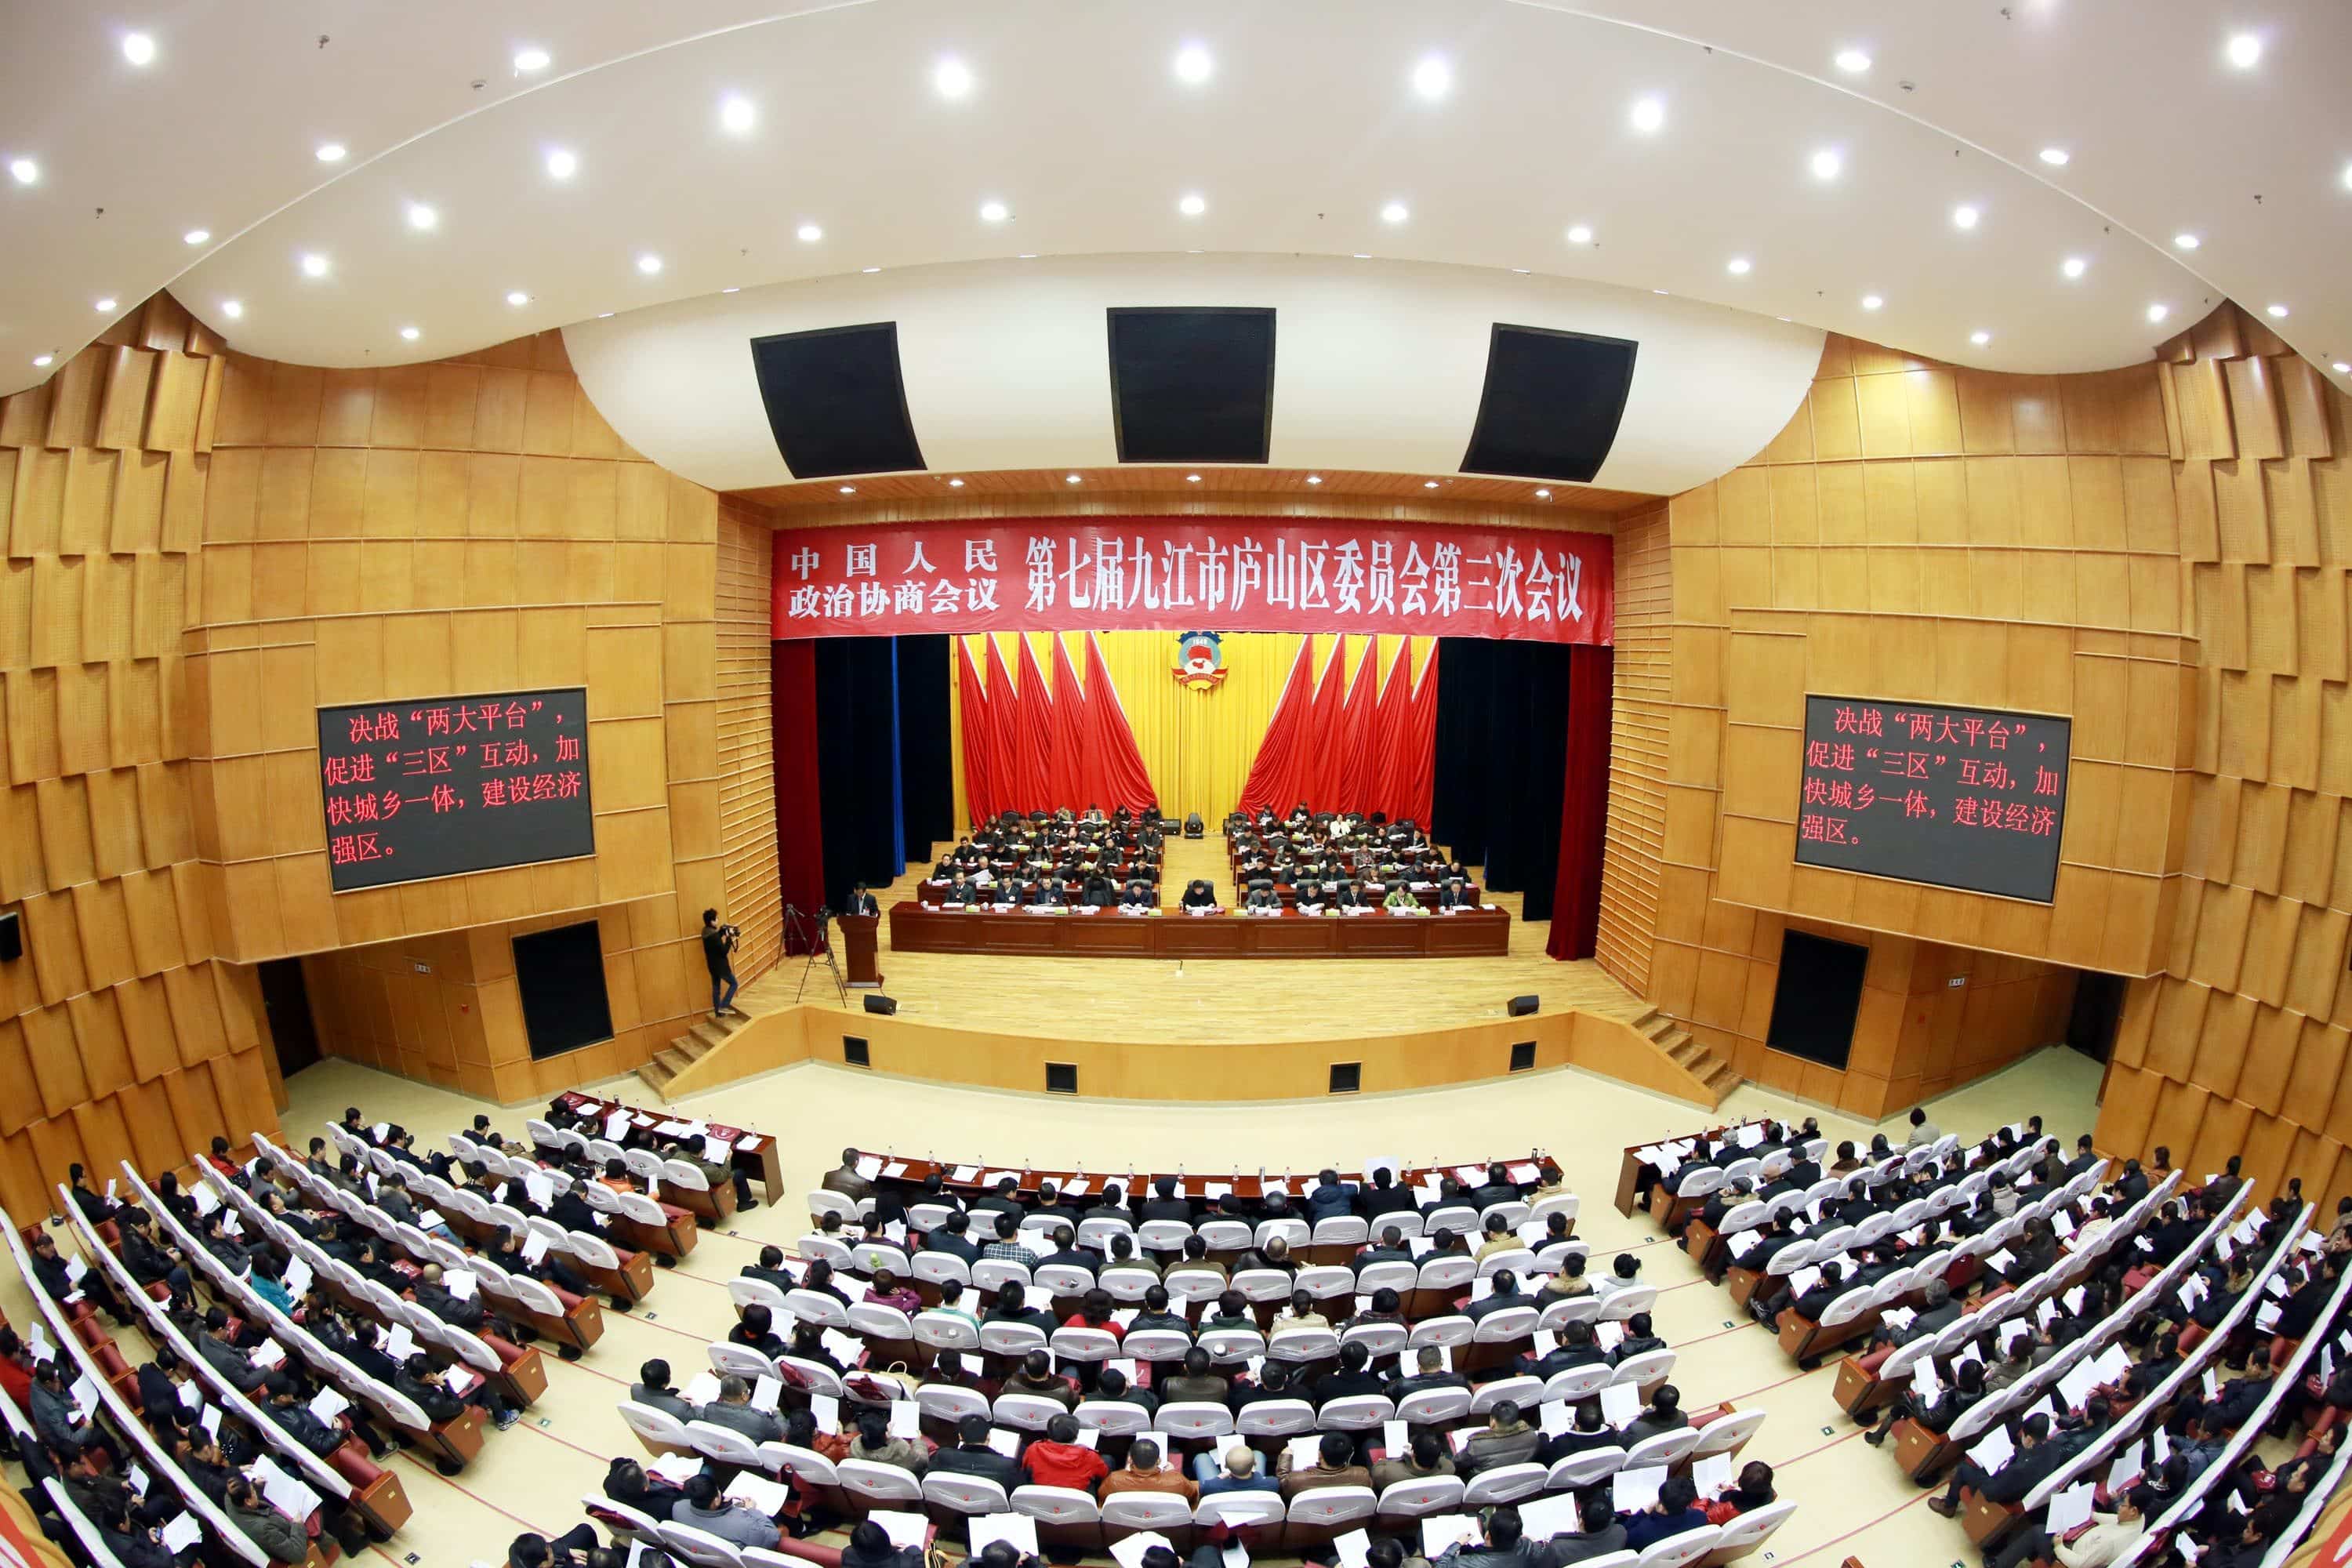 JIANGXI CHINA-January 7, 2013: Chinese People's Political Consultative Conference Lushan District, Jiangxi Province, opening scene. This is the embodiment of China's democratic system.